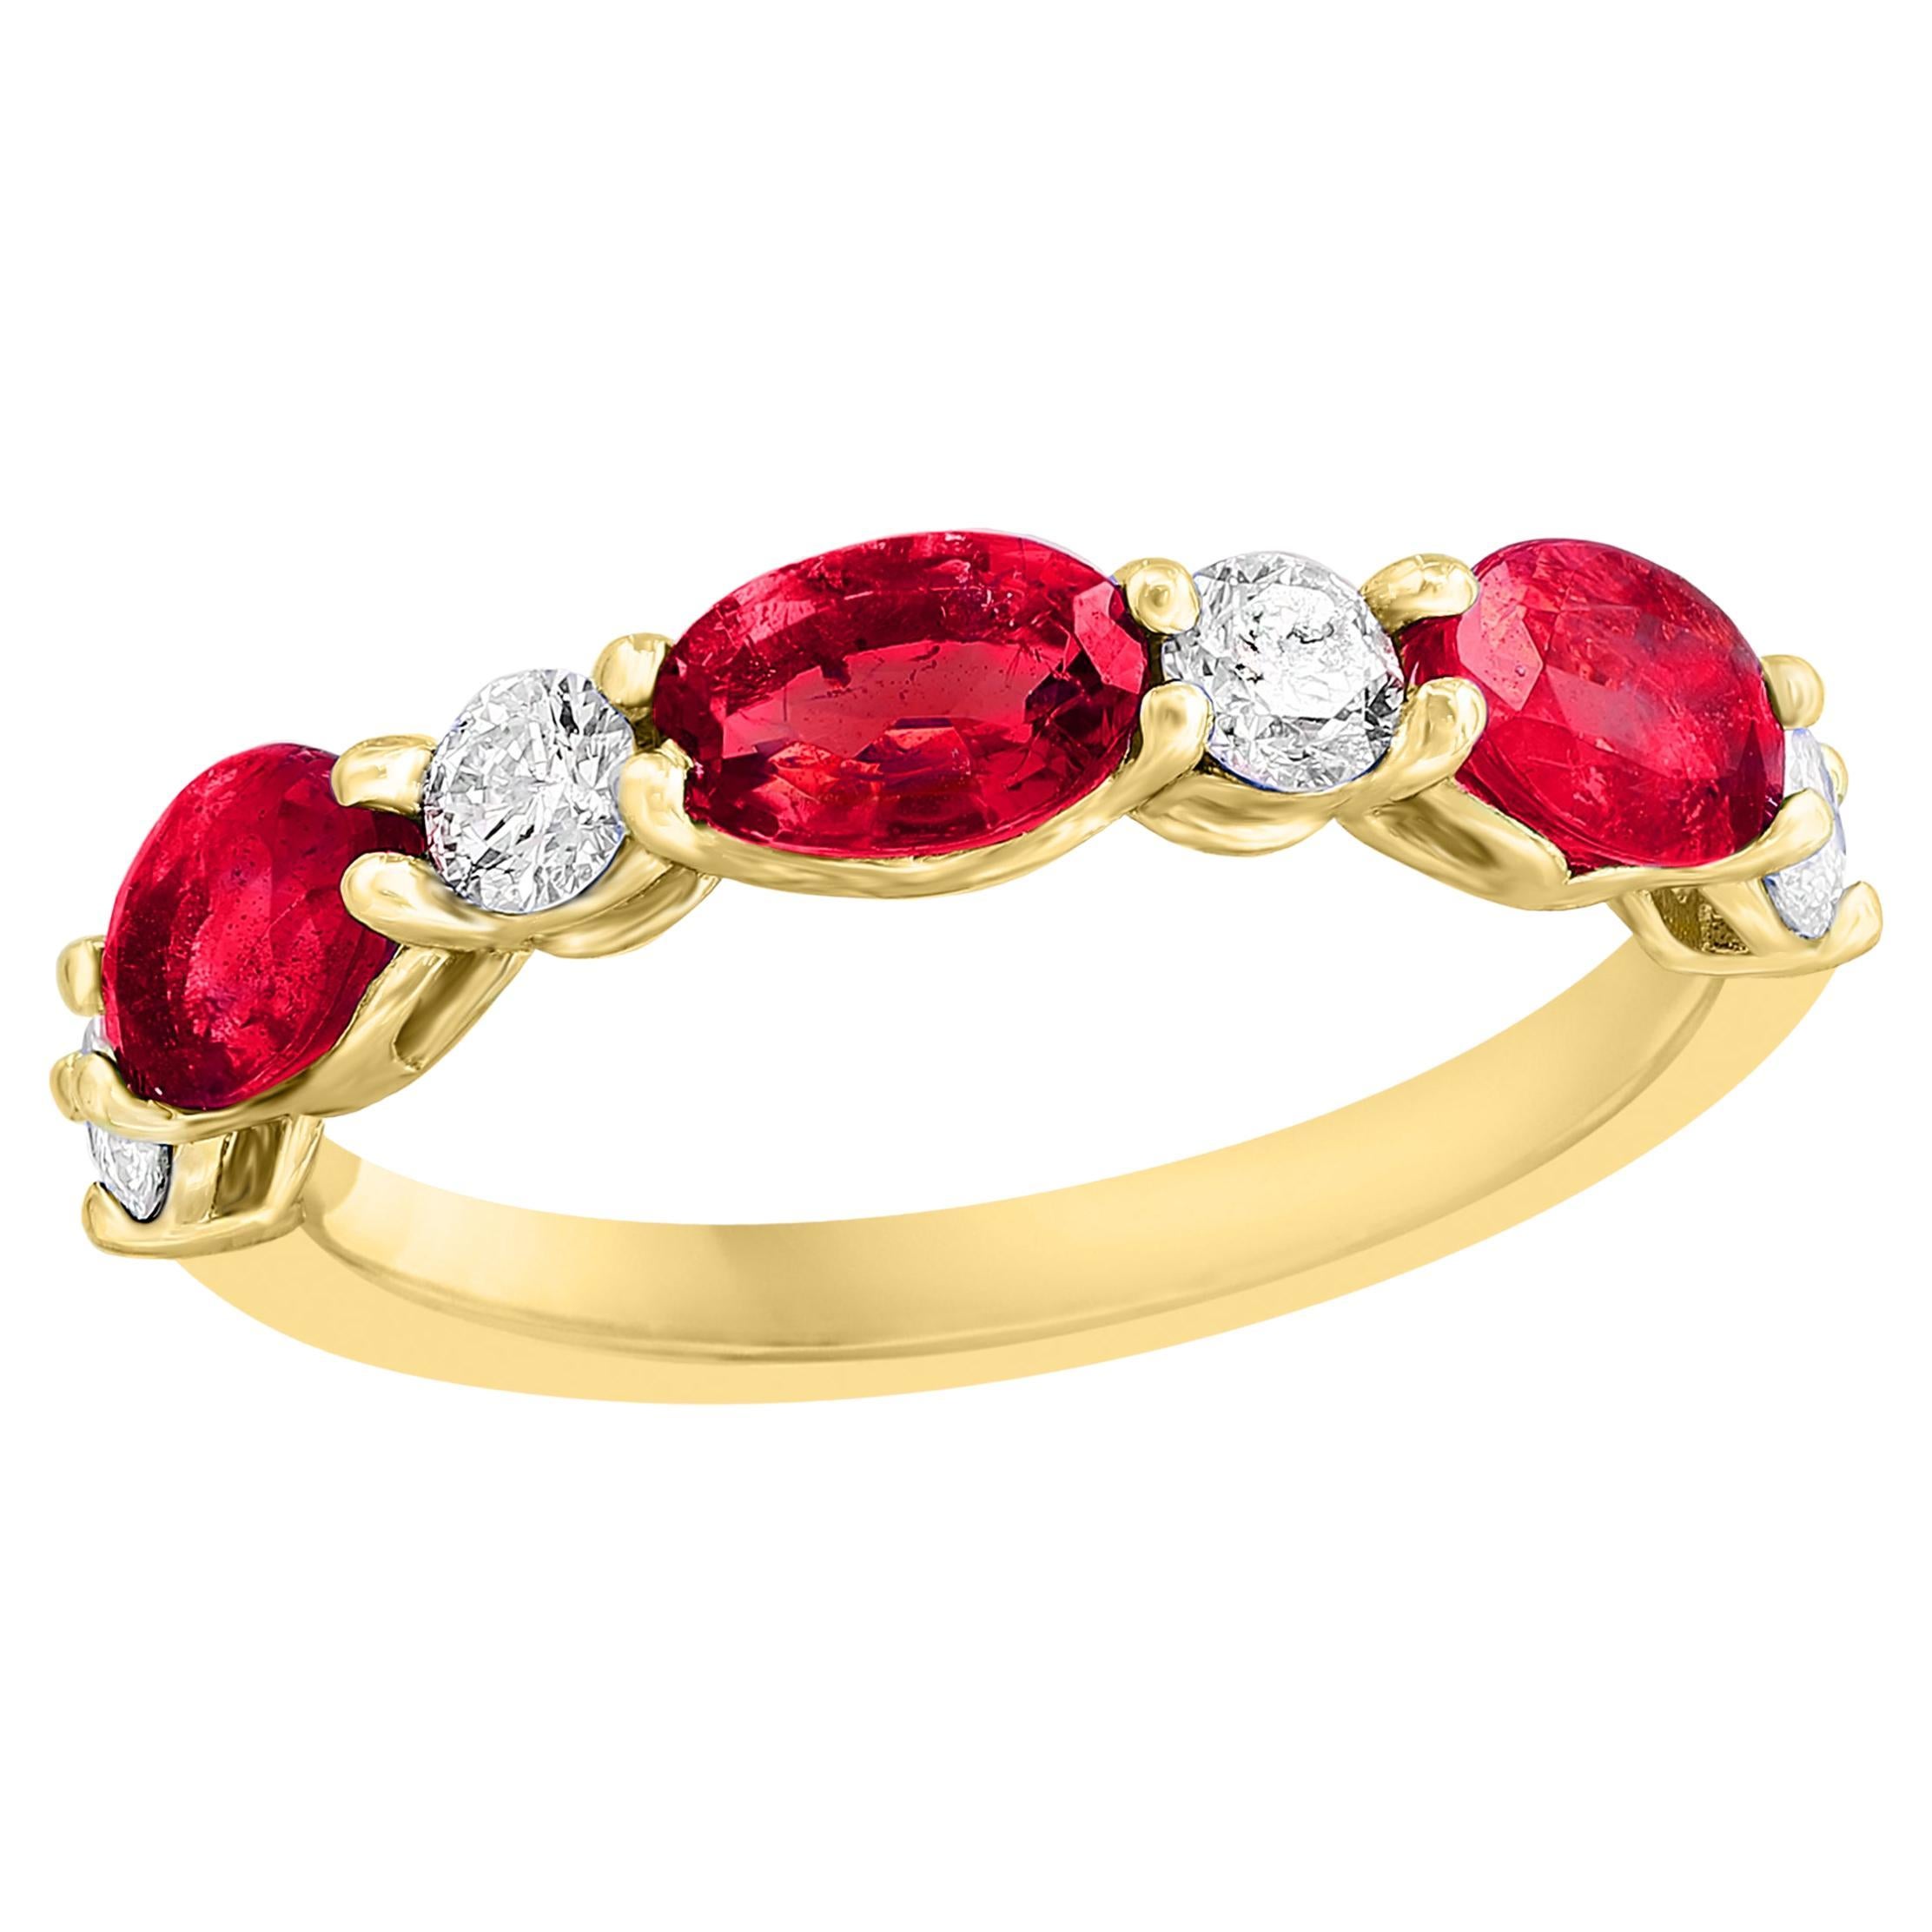 1.71 Carat Oval Cut Ruby and Diamond Band in 14K Yellow Gold